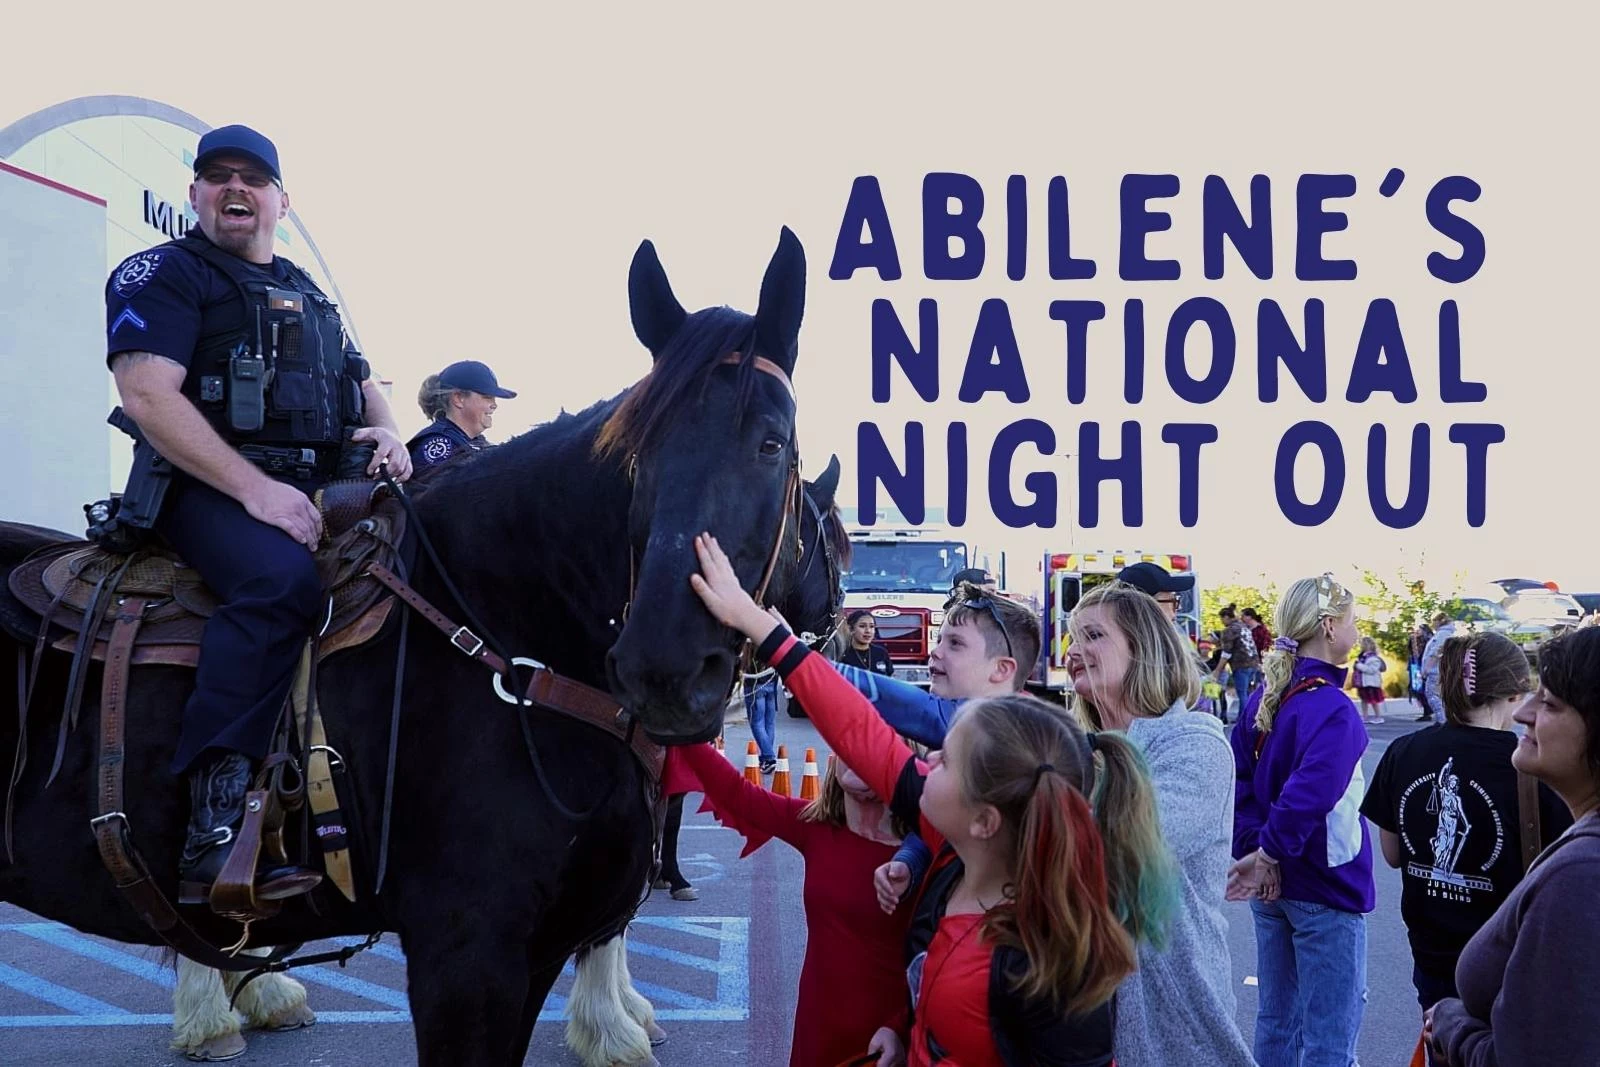 National Night Out Promotes a Bond Between the APD and Abilene image